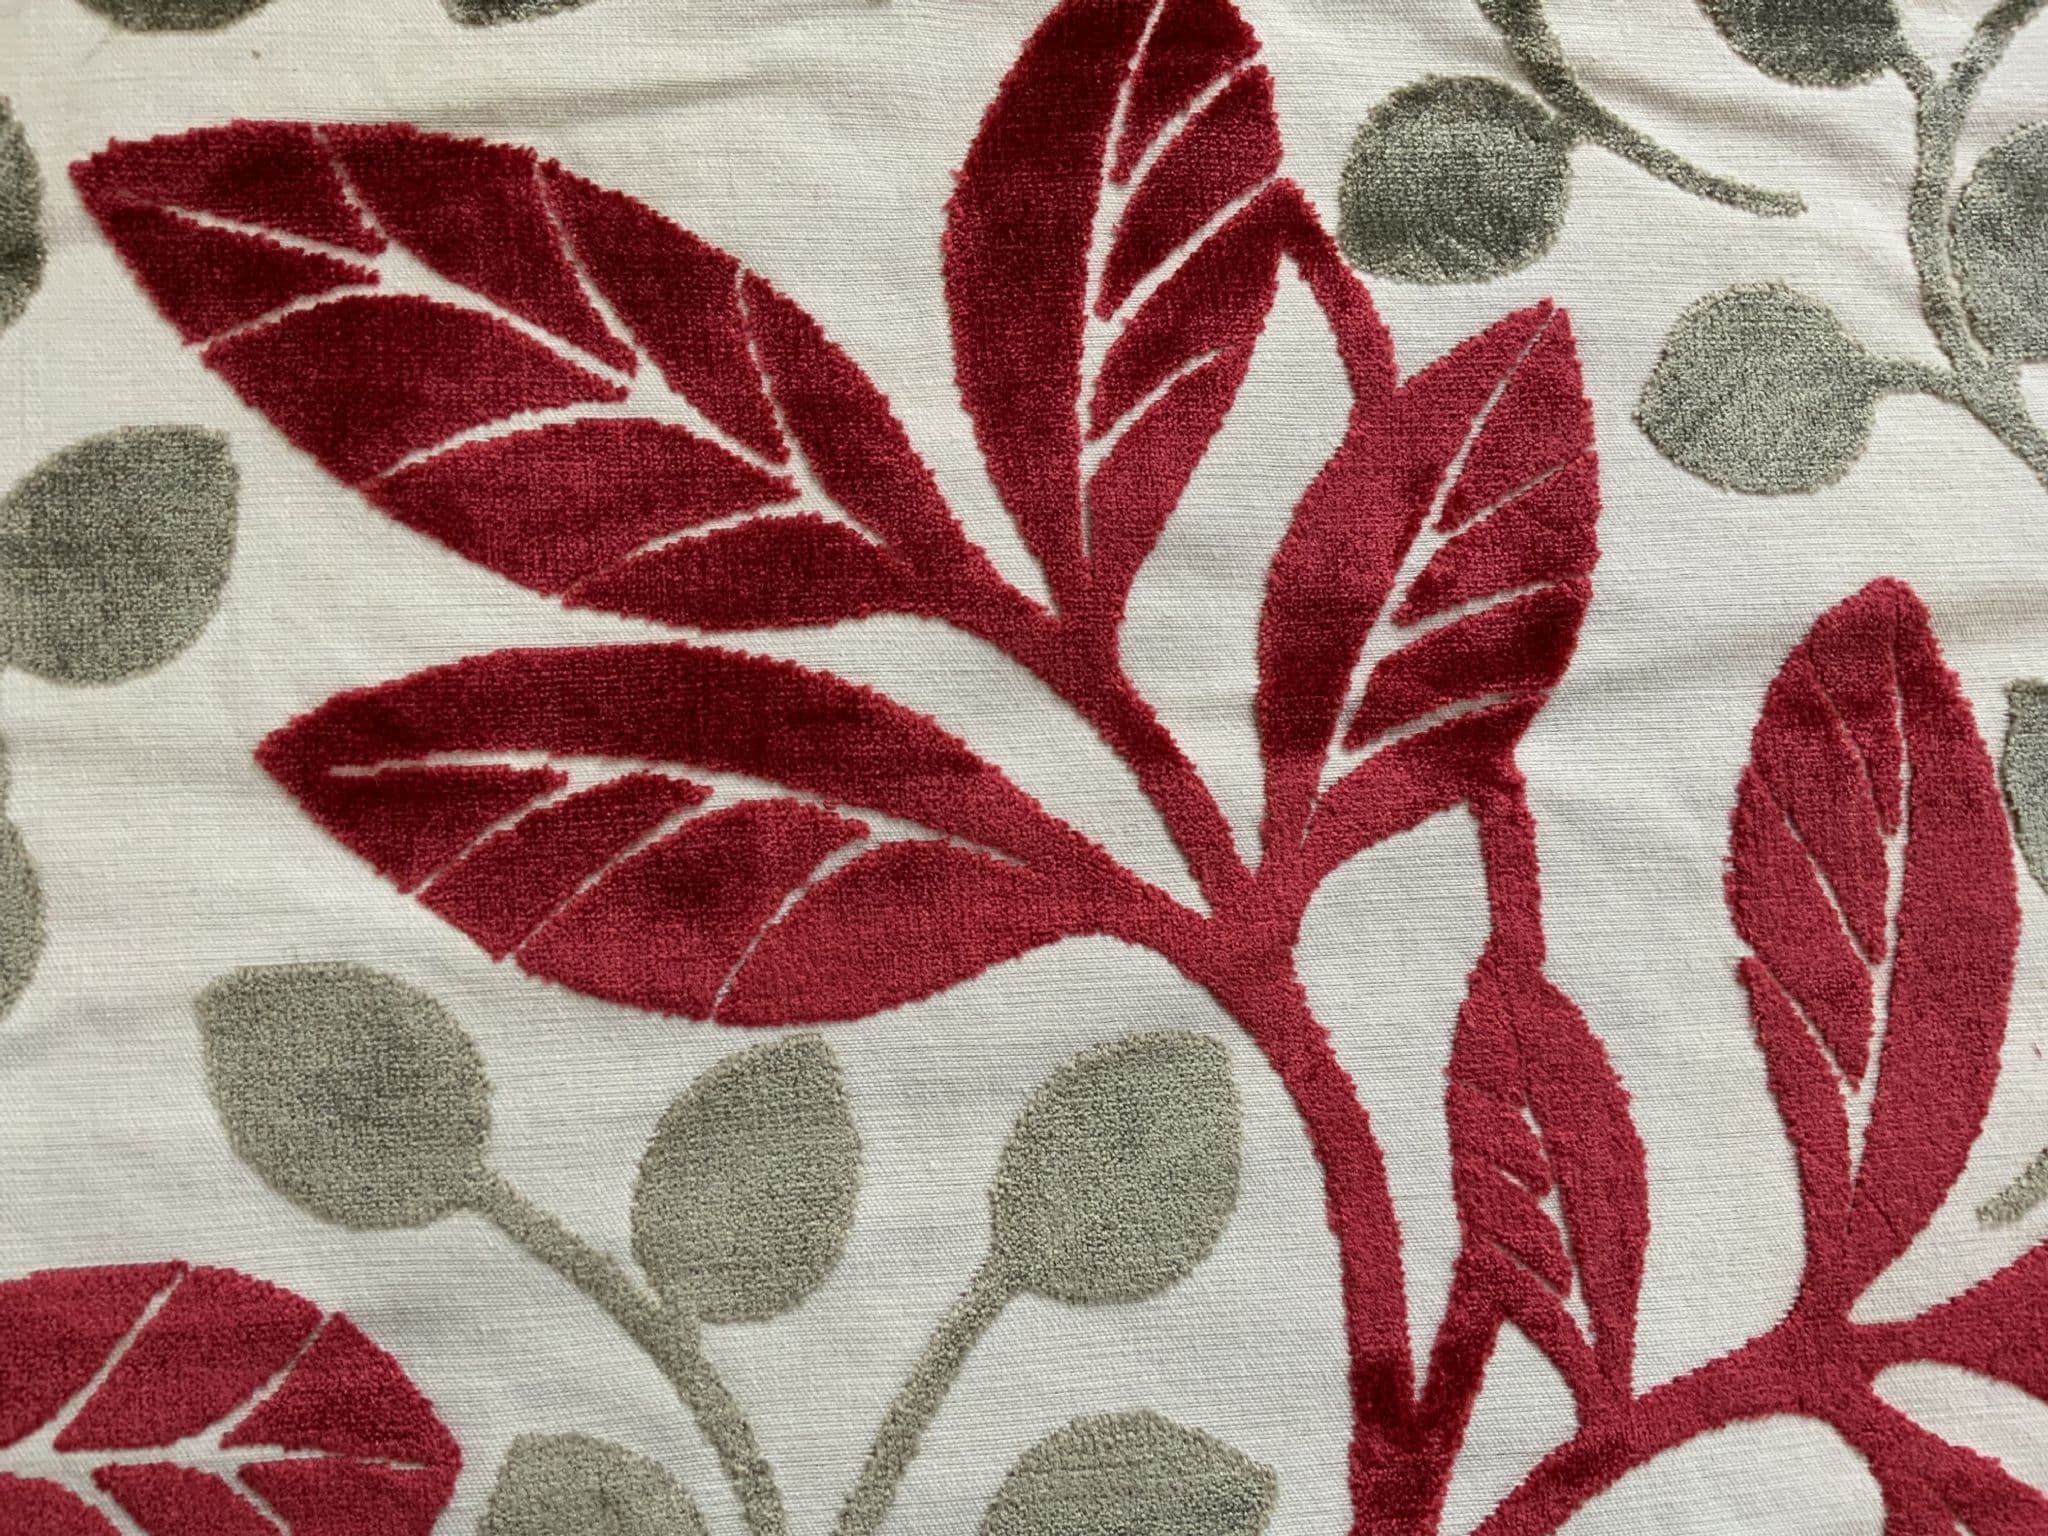 Red and Grey Cut Velvet in a Botanical Design